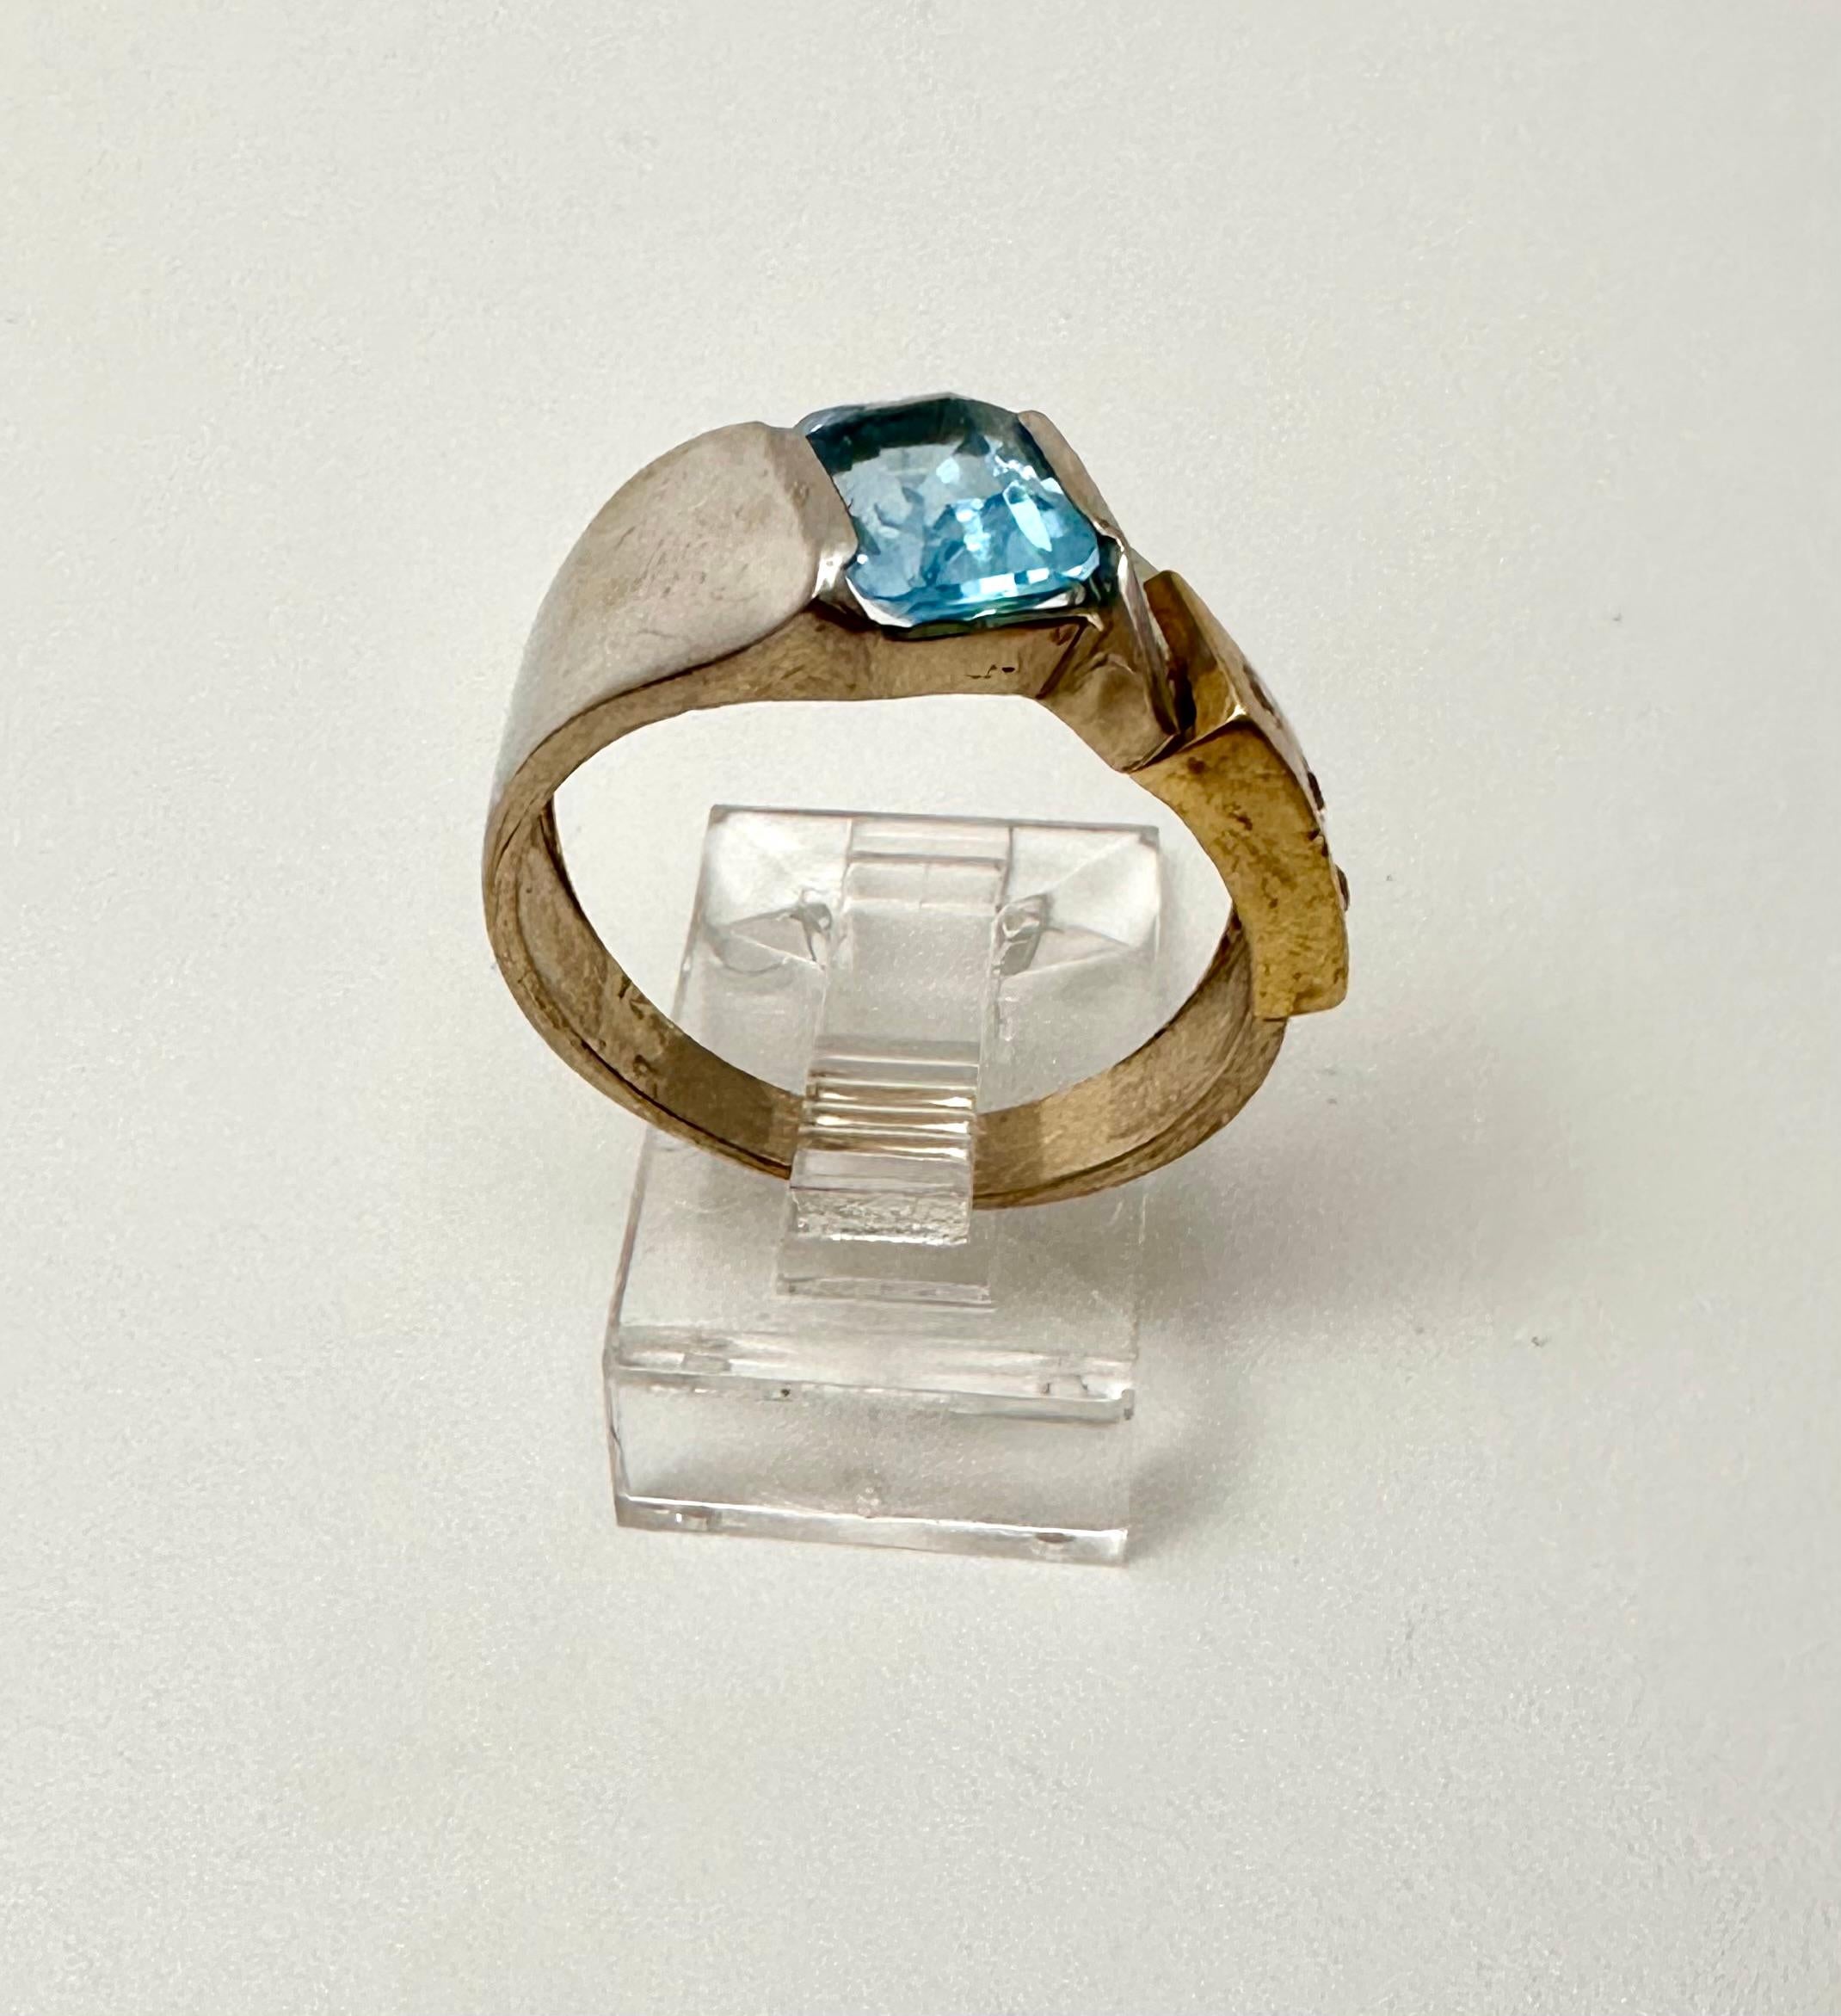 14k Yellow/White Gold 6mm x 8mm Emerald Cut Blue Topaz Diamond Ring Size  7 1/2 In New Condition For Sale In Las Vegas, NV